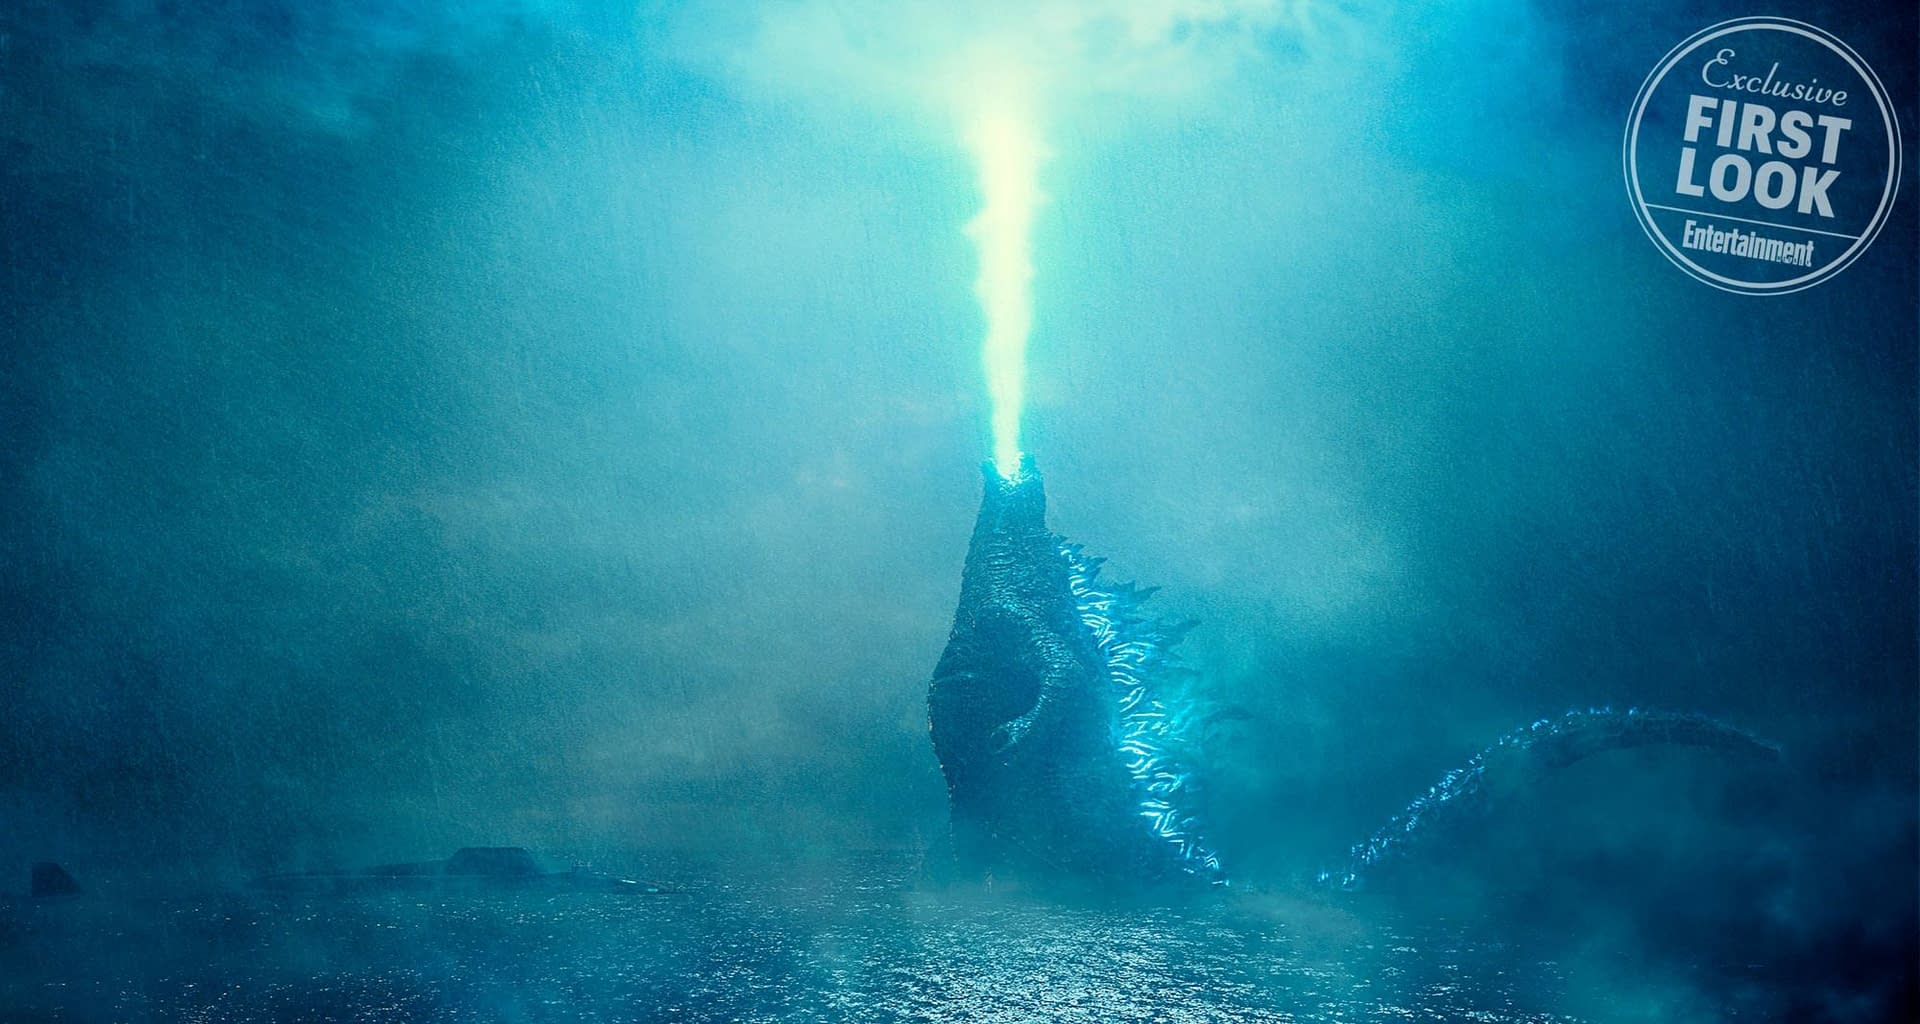 First Look at Godzilla: King of the Monsters